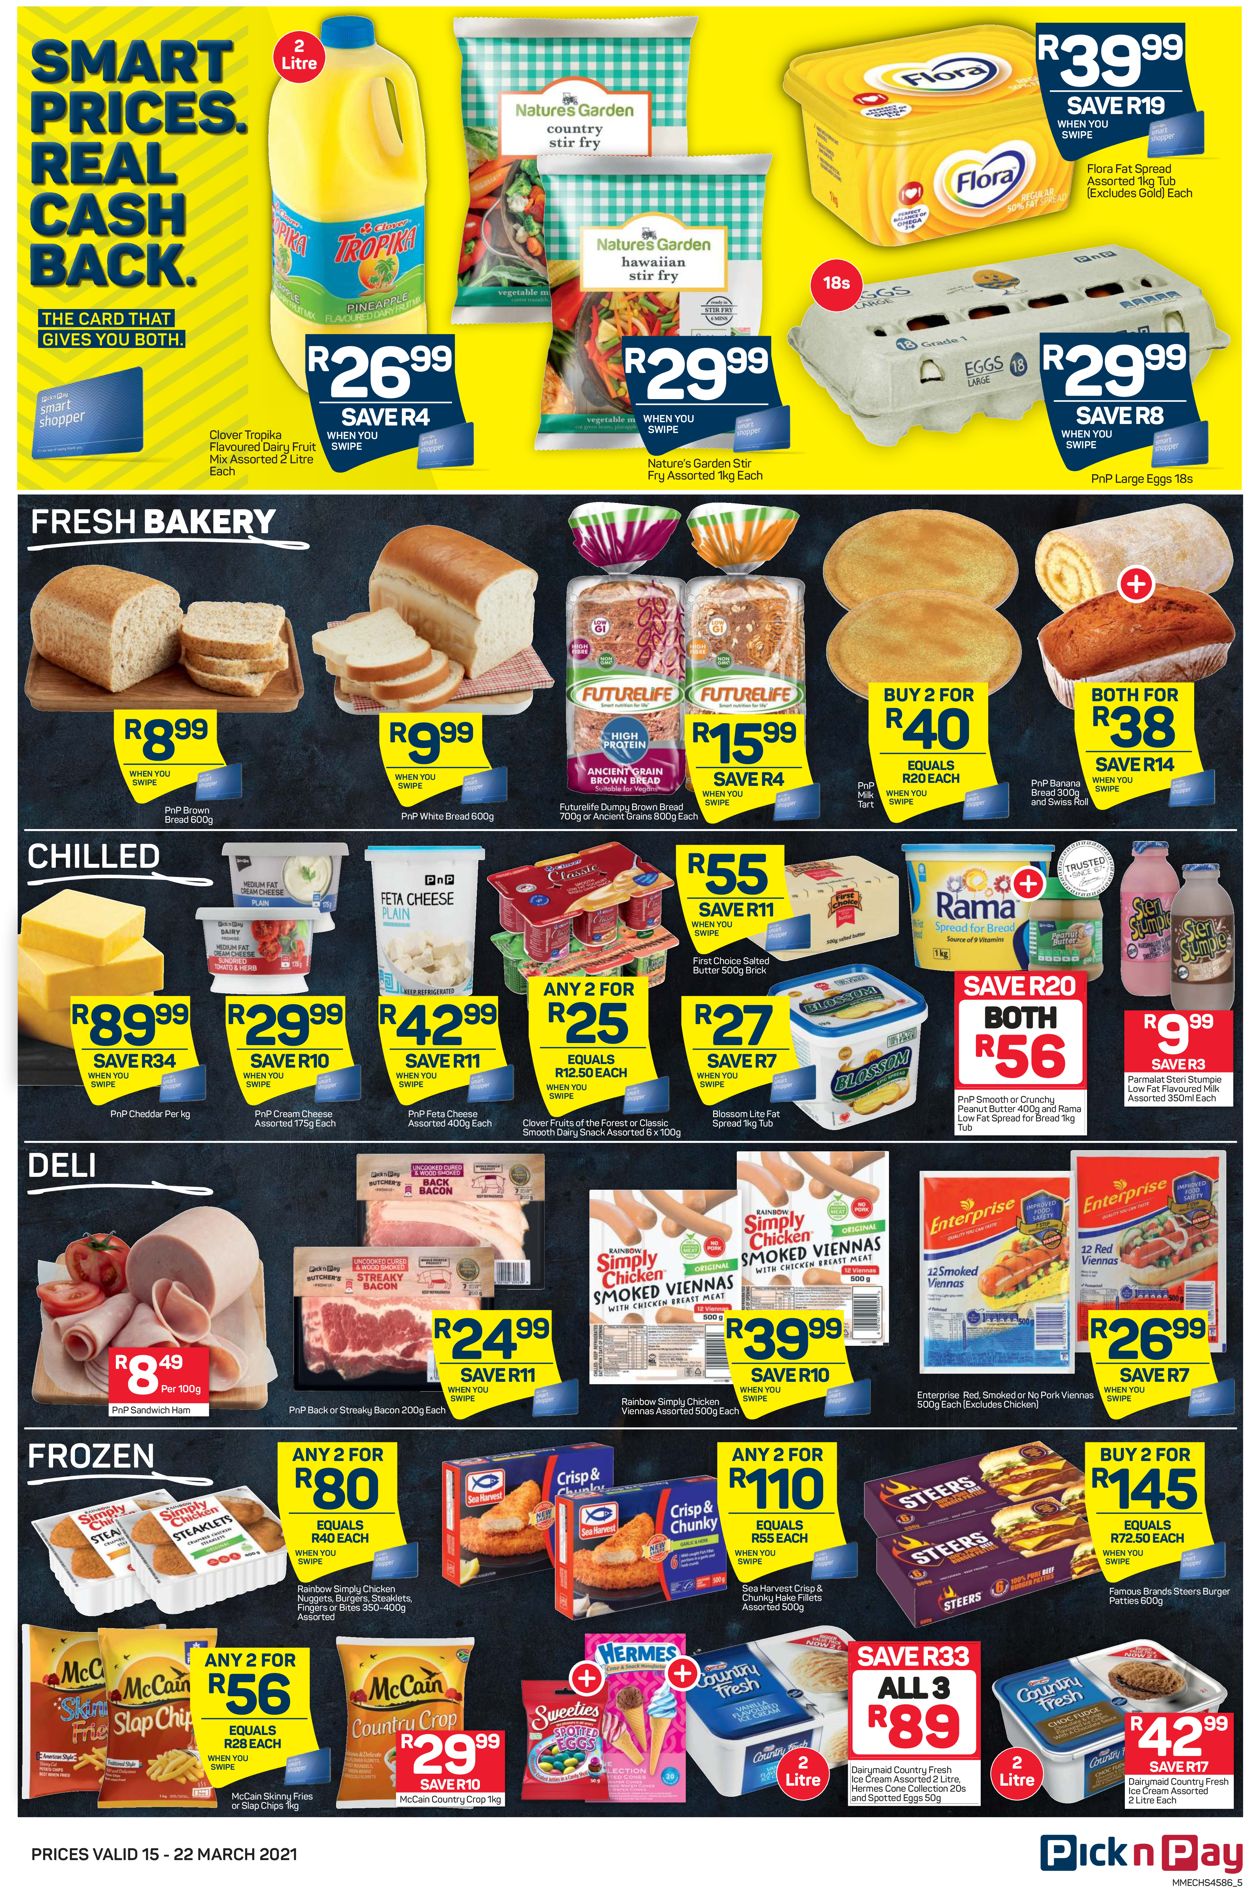 Pick n Pay Catalogue - 2021/03/15-2021/03/22 (Page 5)